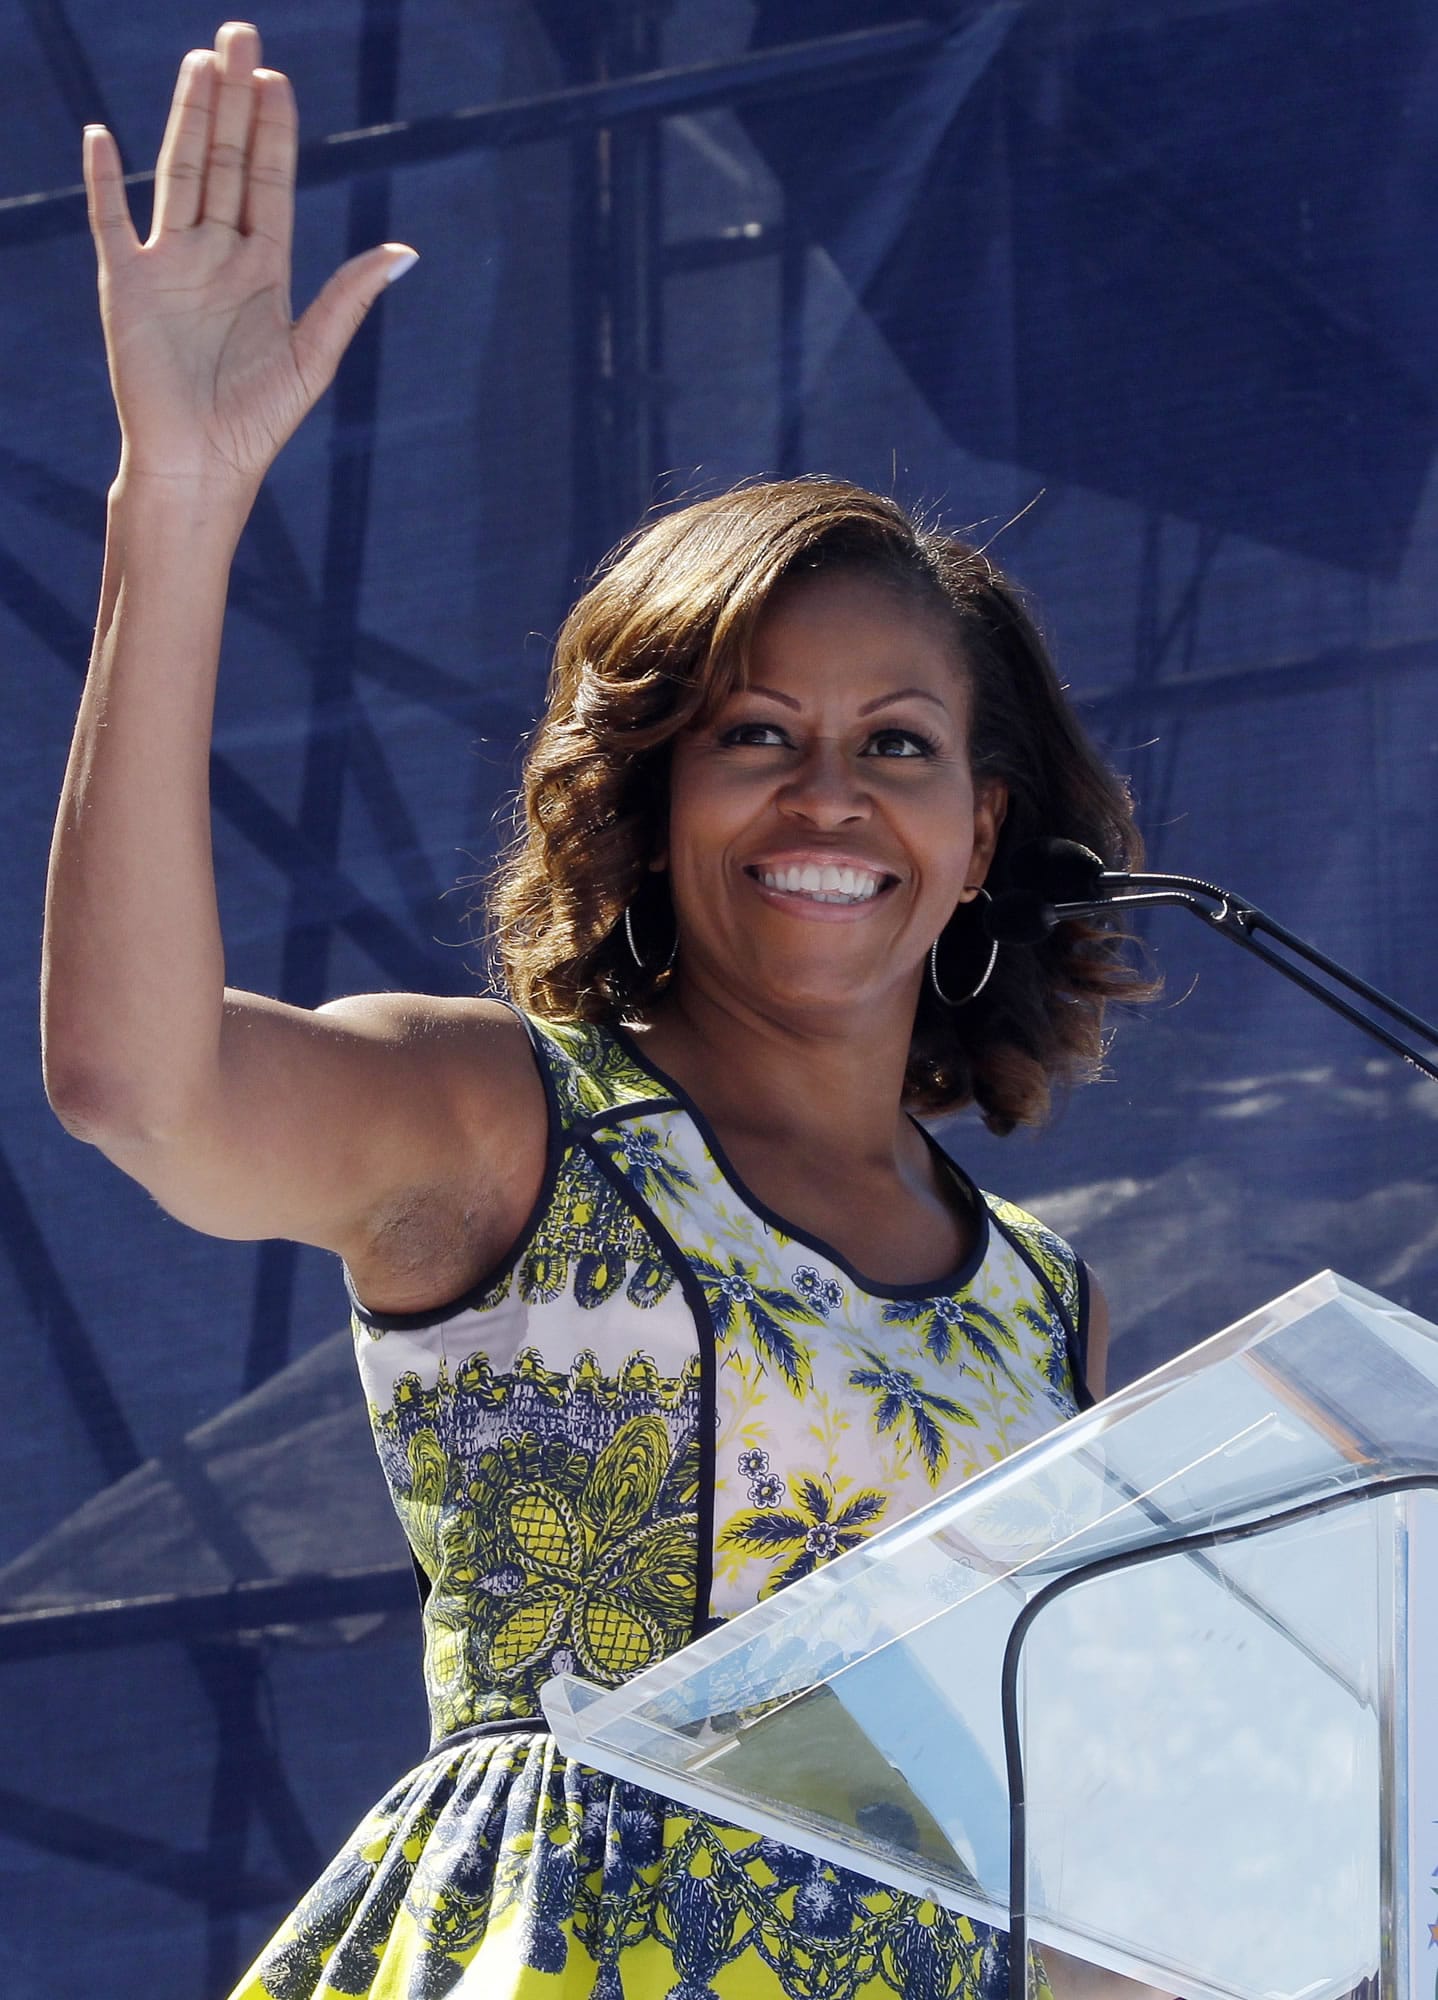 Michelle Obama
Speaks at event at D.C. school